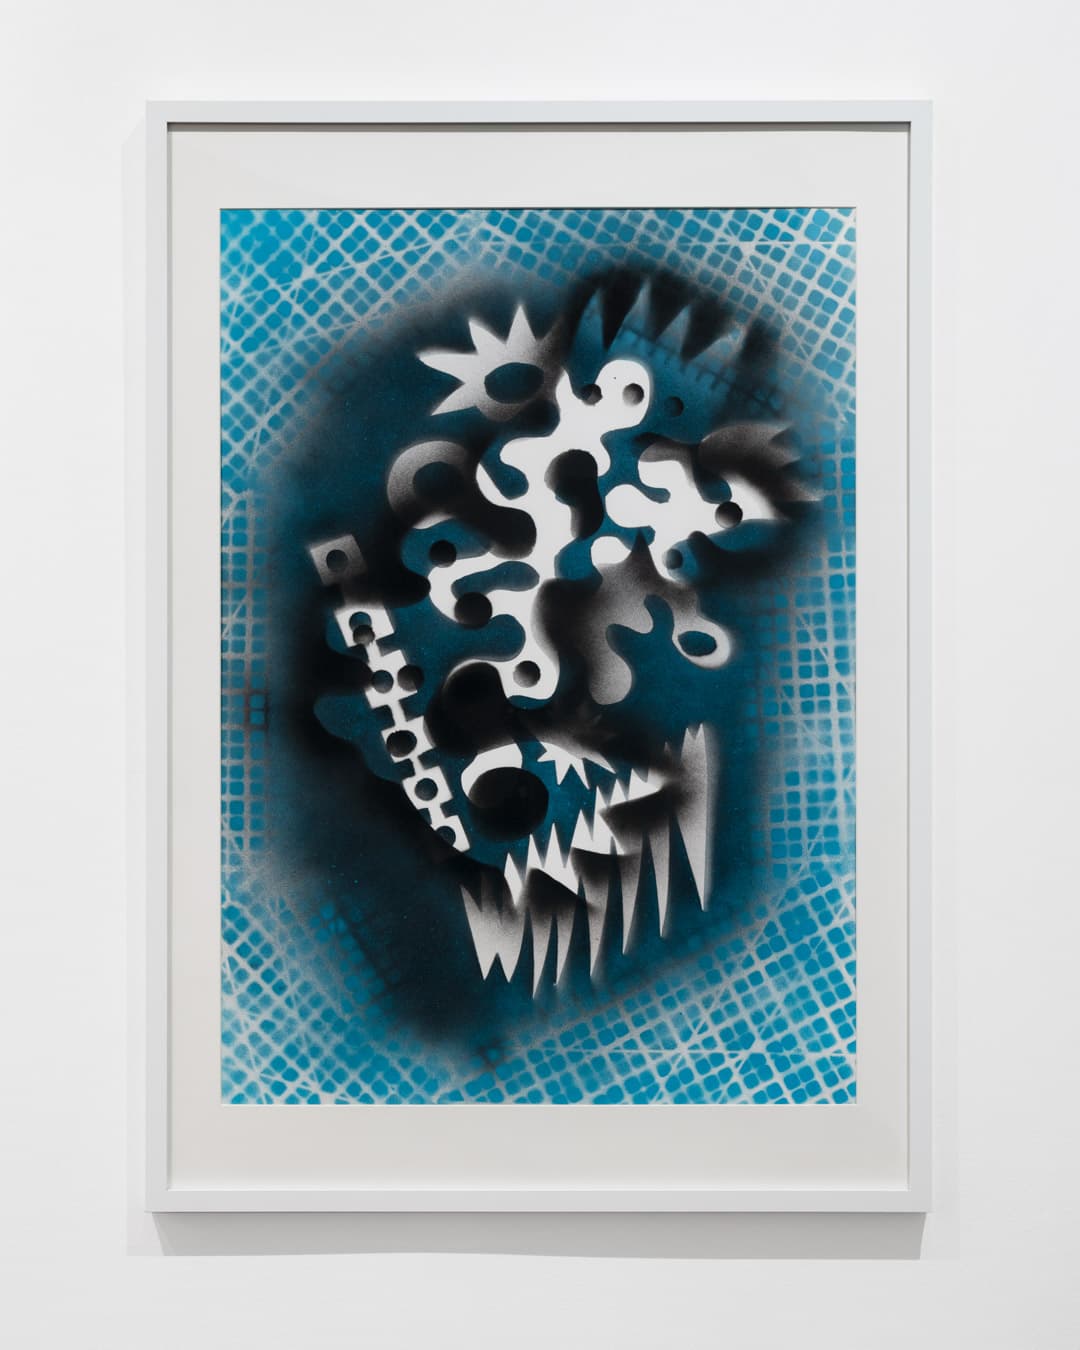 Abstraction 1 - Spray Paint with Cutwork Frame Art